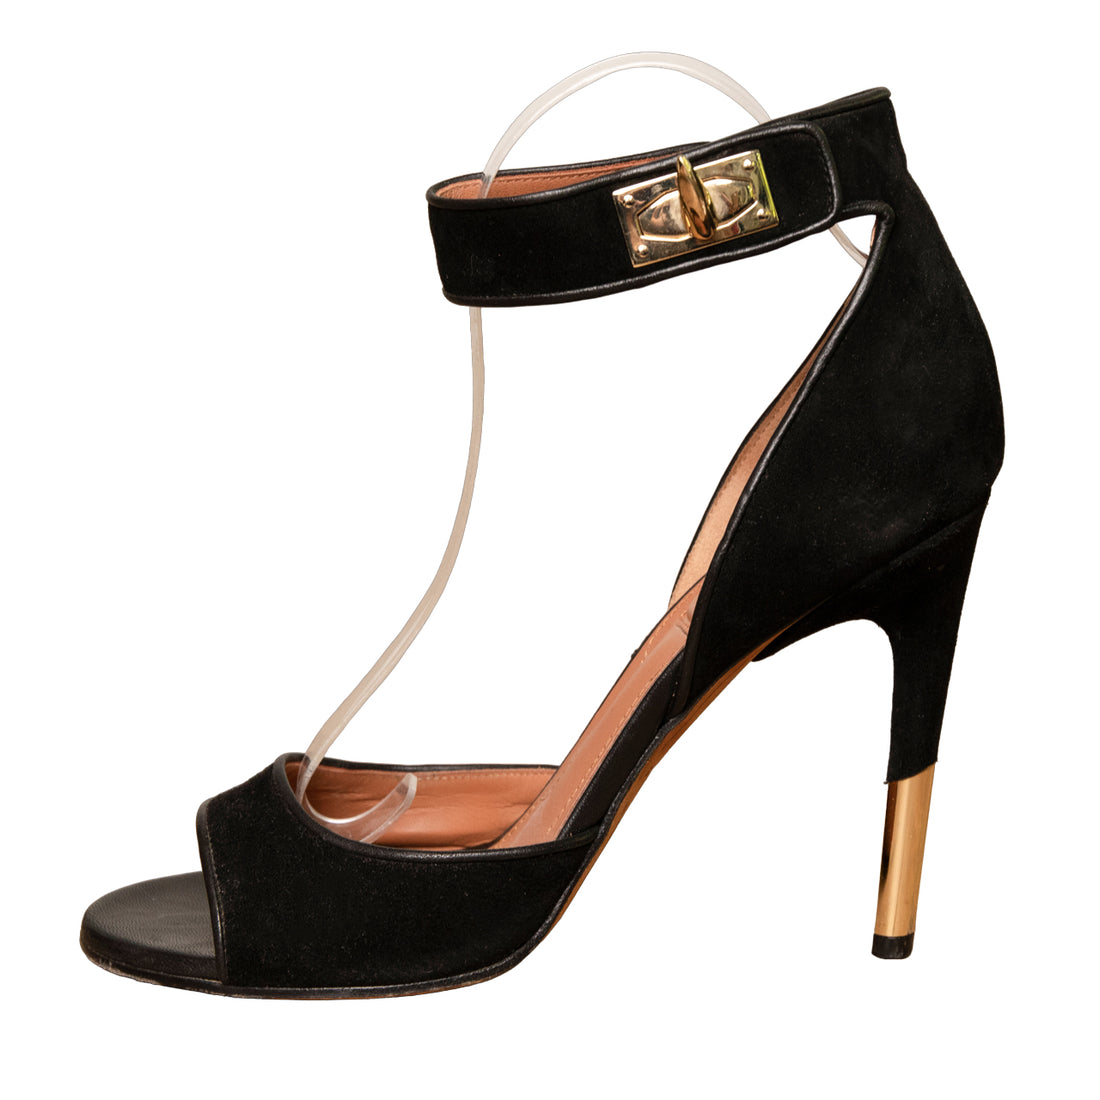 Givenchy ankle strap sandals with gold heel